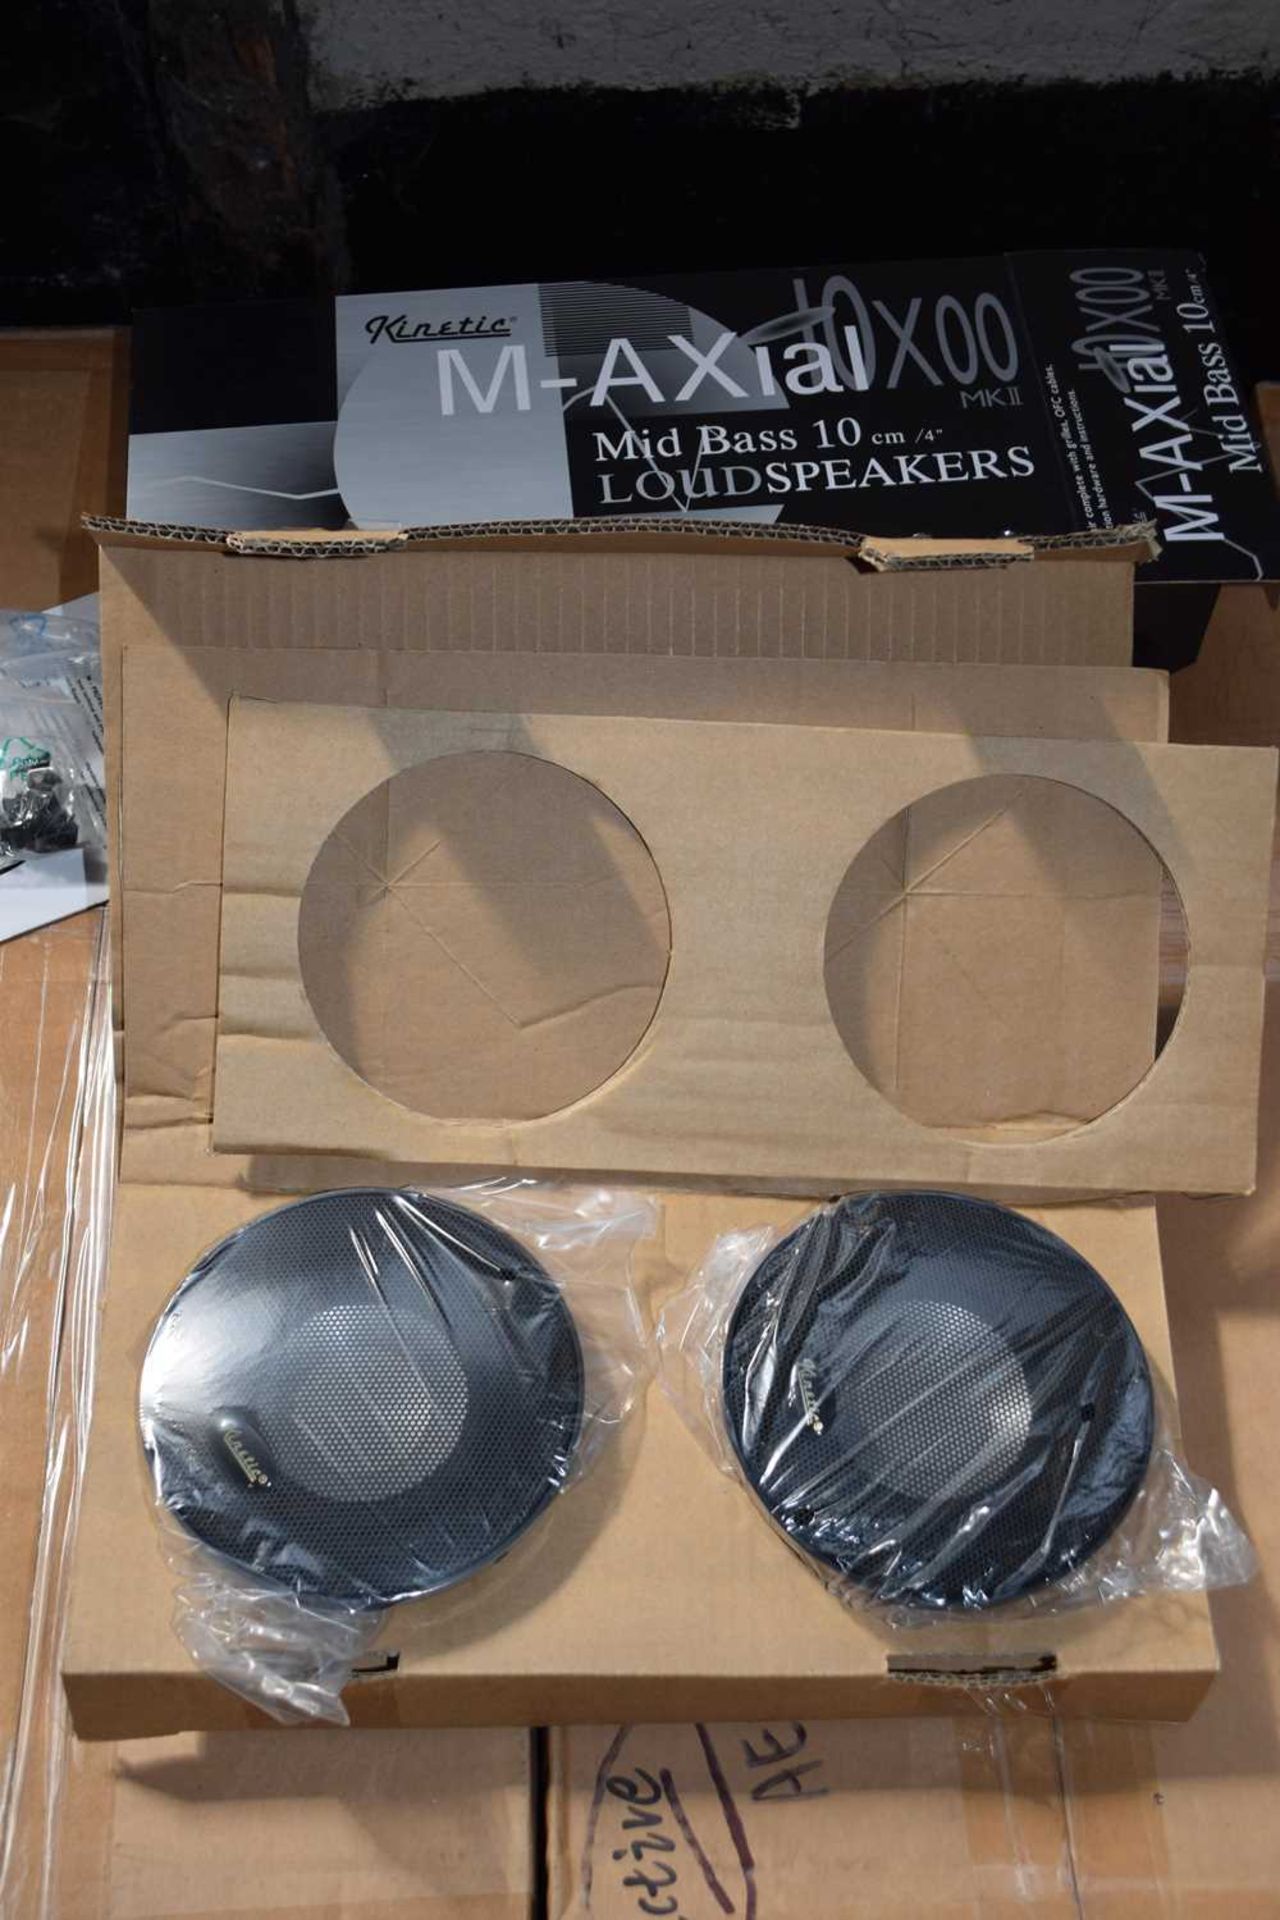 Box of 6 pairs of Kinetic M/AXIAL Mid bass 10cm loud speakers 10X00MK2 - Image 4 of 7